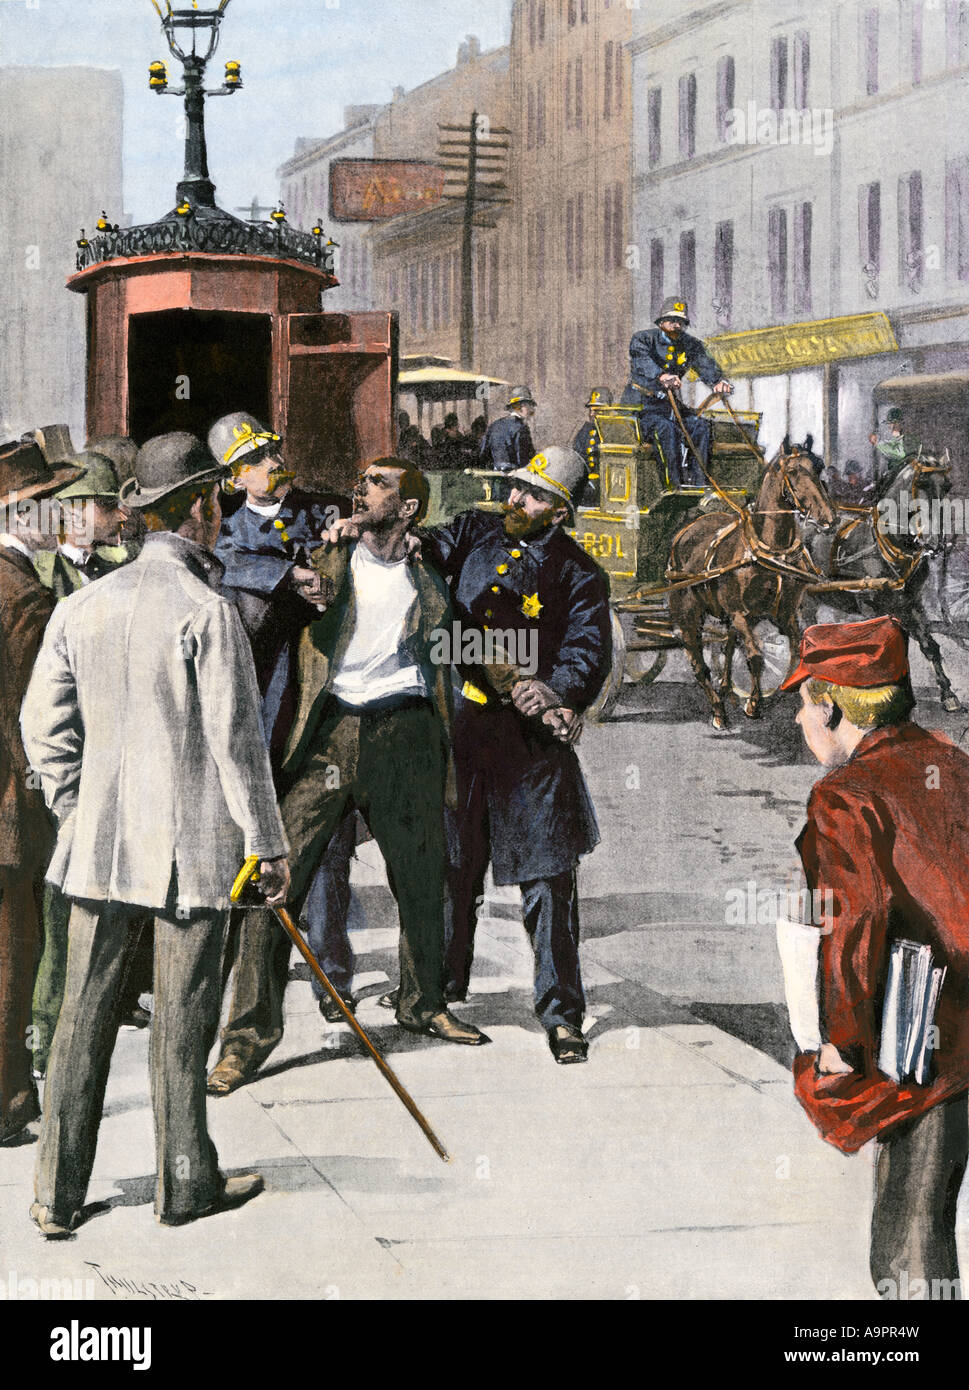 Police making a patrol-box arrest in Chicago 1890s. Hand-colored halftone of an illustration Stock Photo